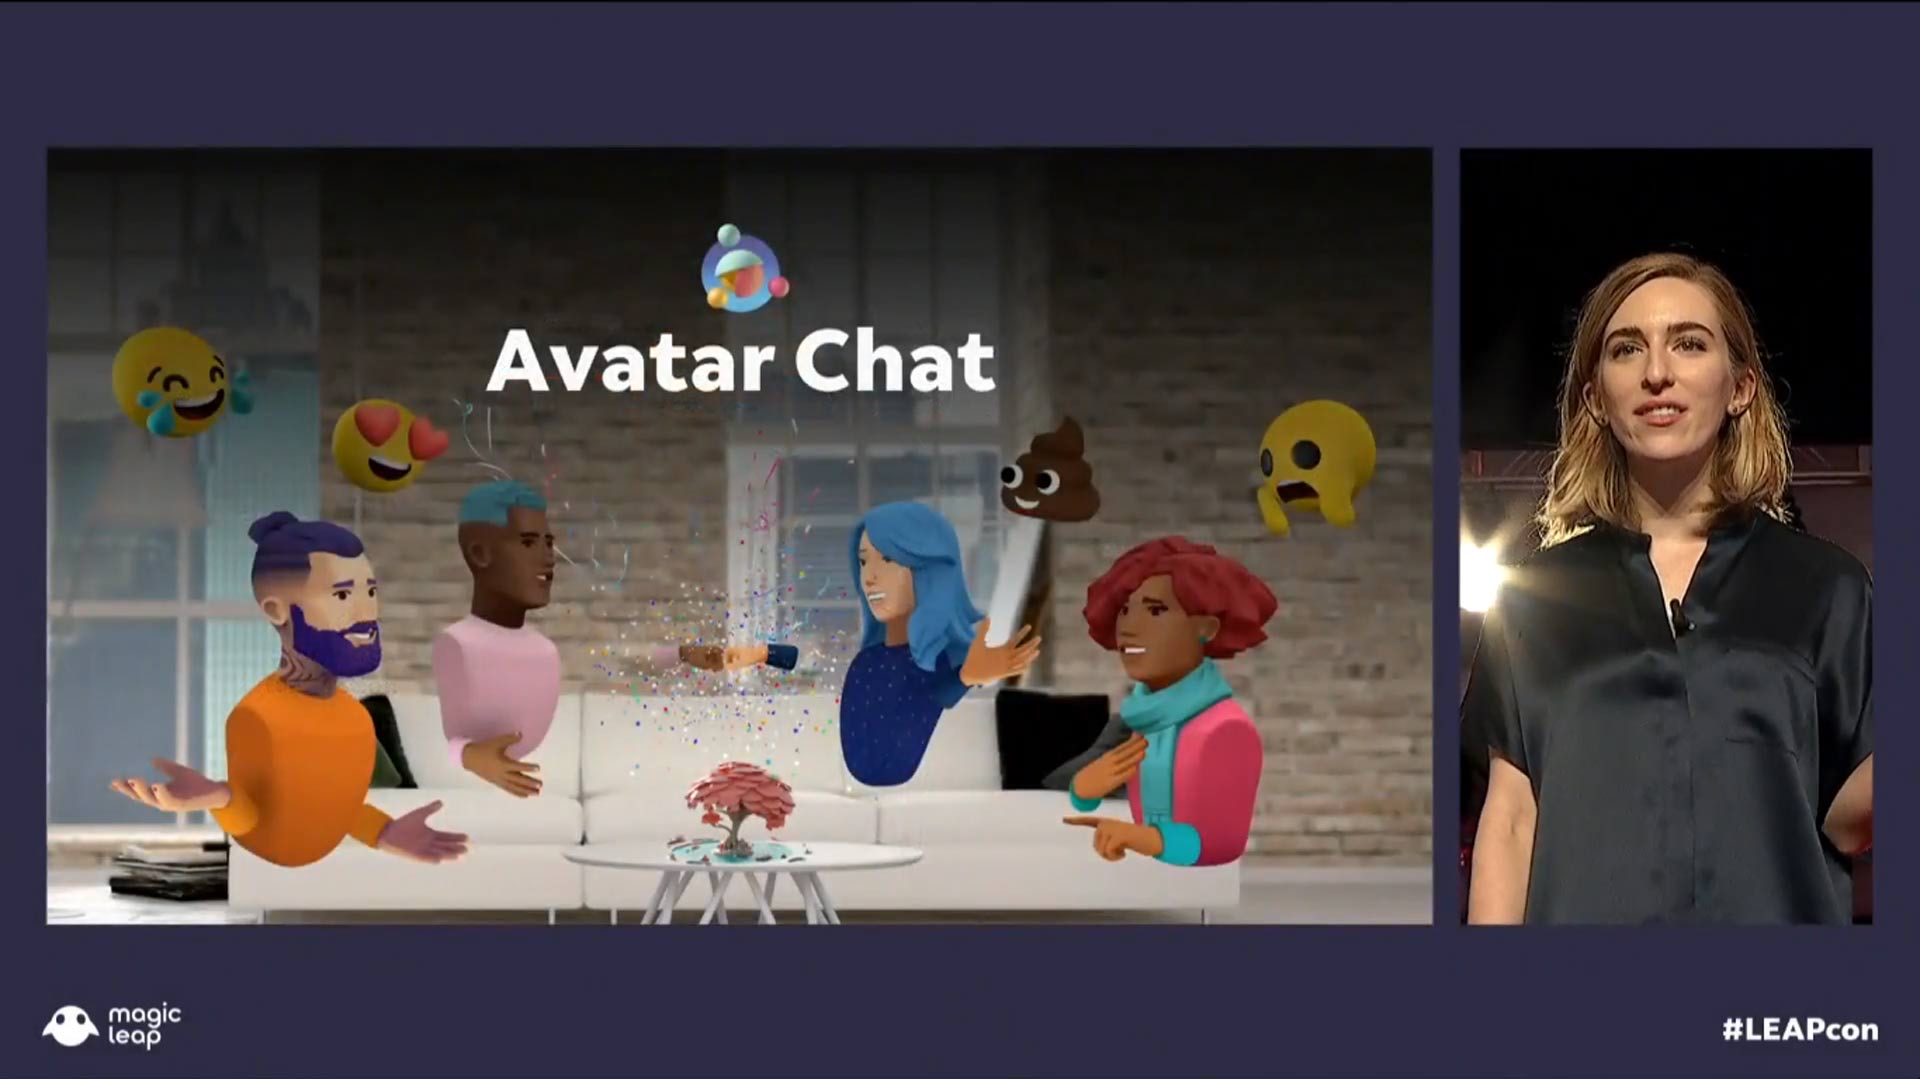 Leap Con 18 Magic Leap To Launch Avatar Chat Next Month Developer Tools To Create Multiuser Apps